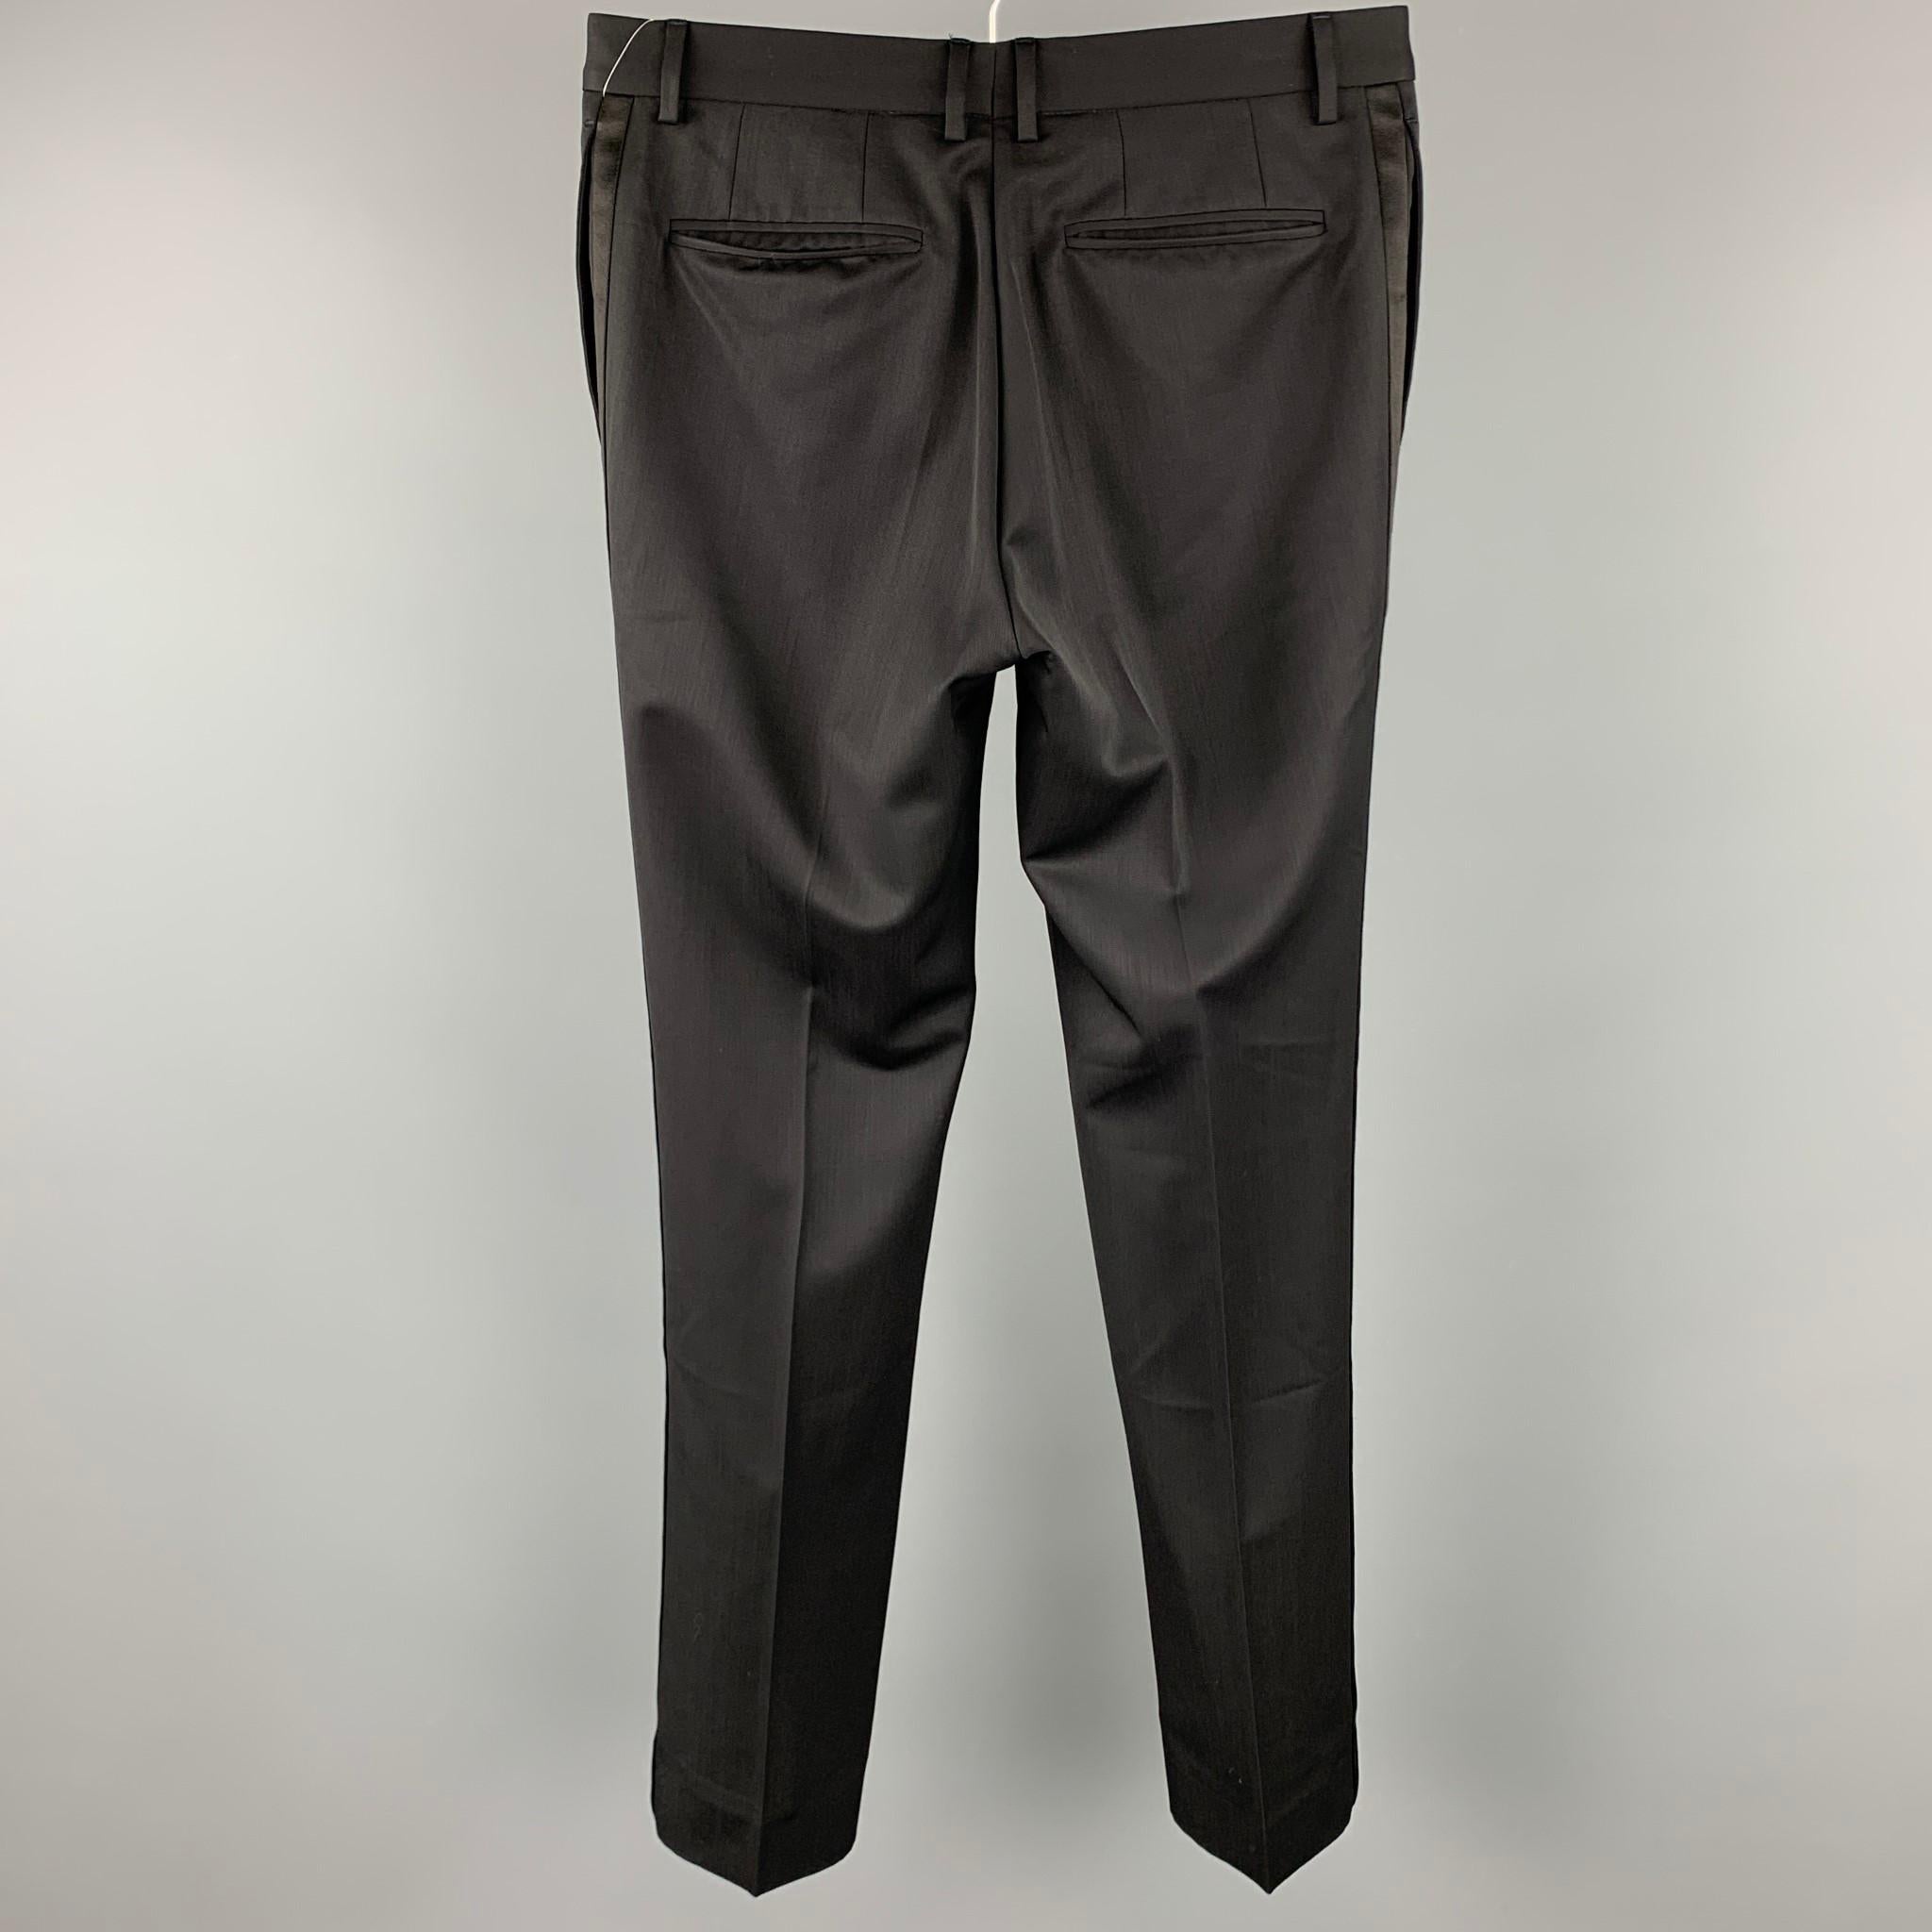 BURBERRY tuxedo dress pants comes in a black wool featuring a slim fit, front tab, and a zip fly closure. 

Very Good Pre-Owned Condition.
Marked: Custom

Measurements:

Waist: 31 in.
Rise: 8.5 in.
Inseam: 32 in. 